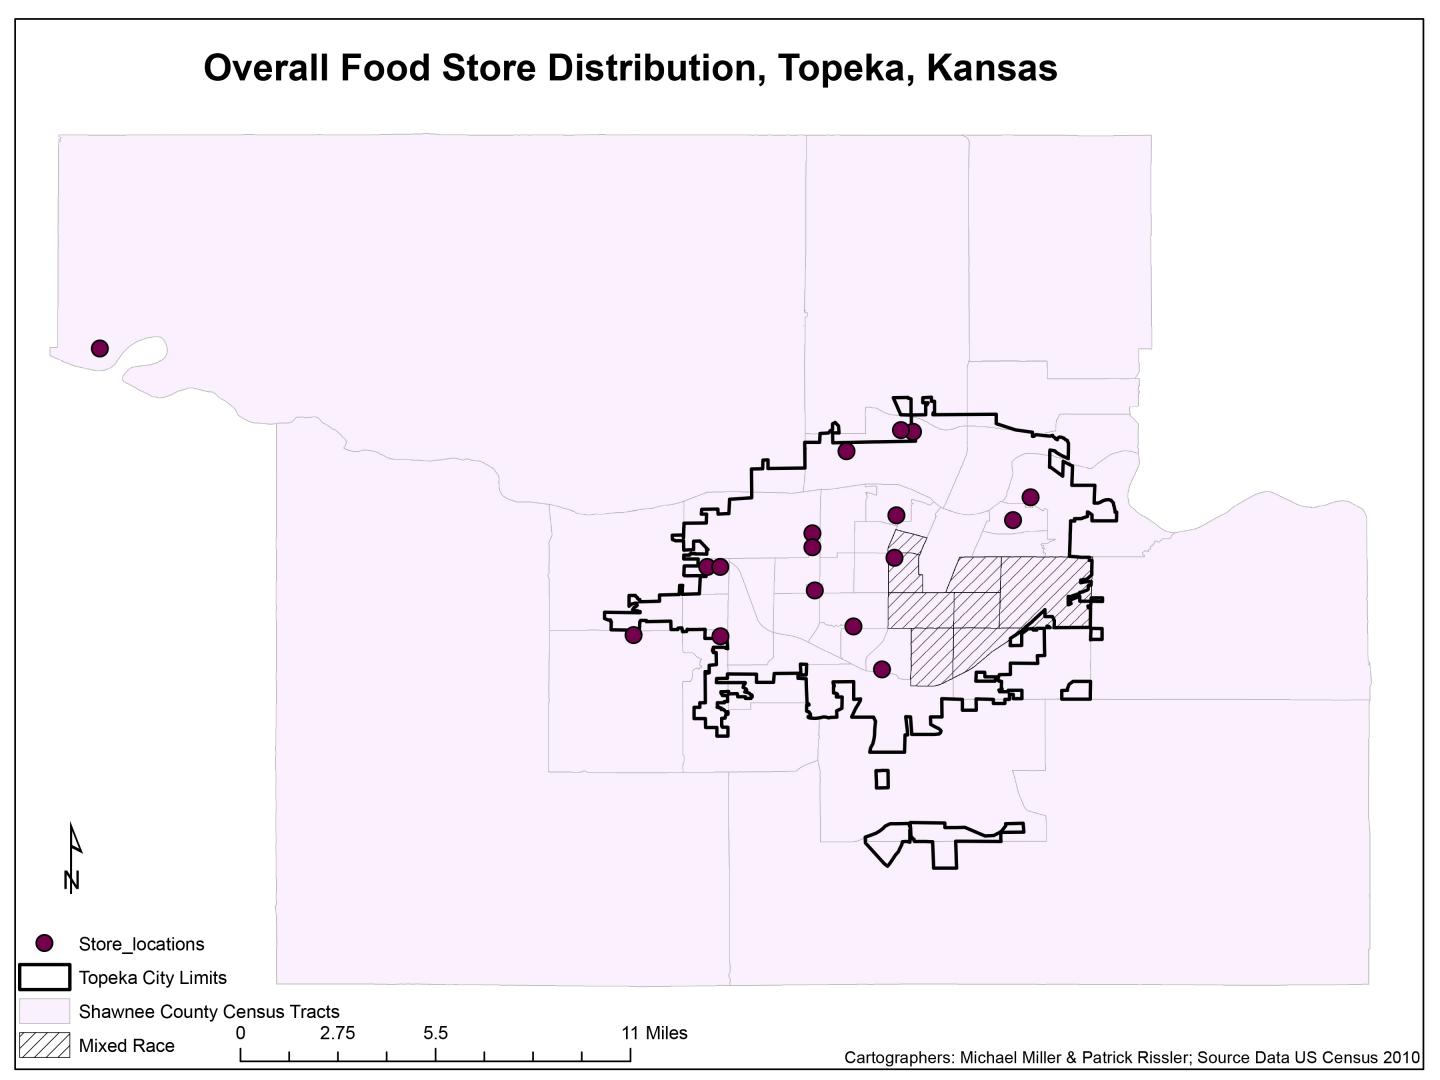 A Map of the Overall Food Stores in Topeka, Kansas